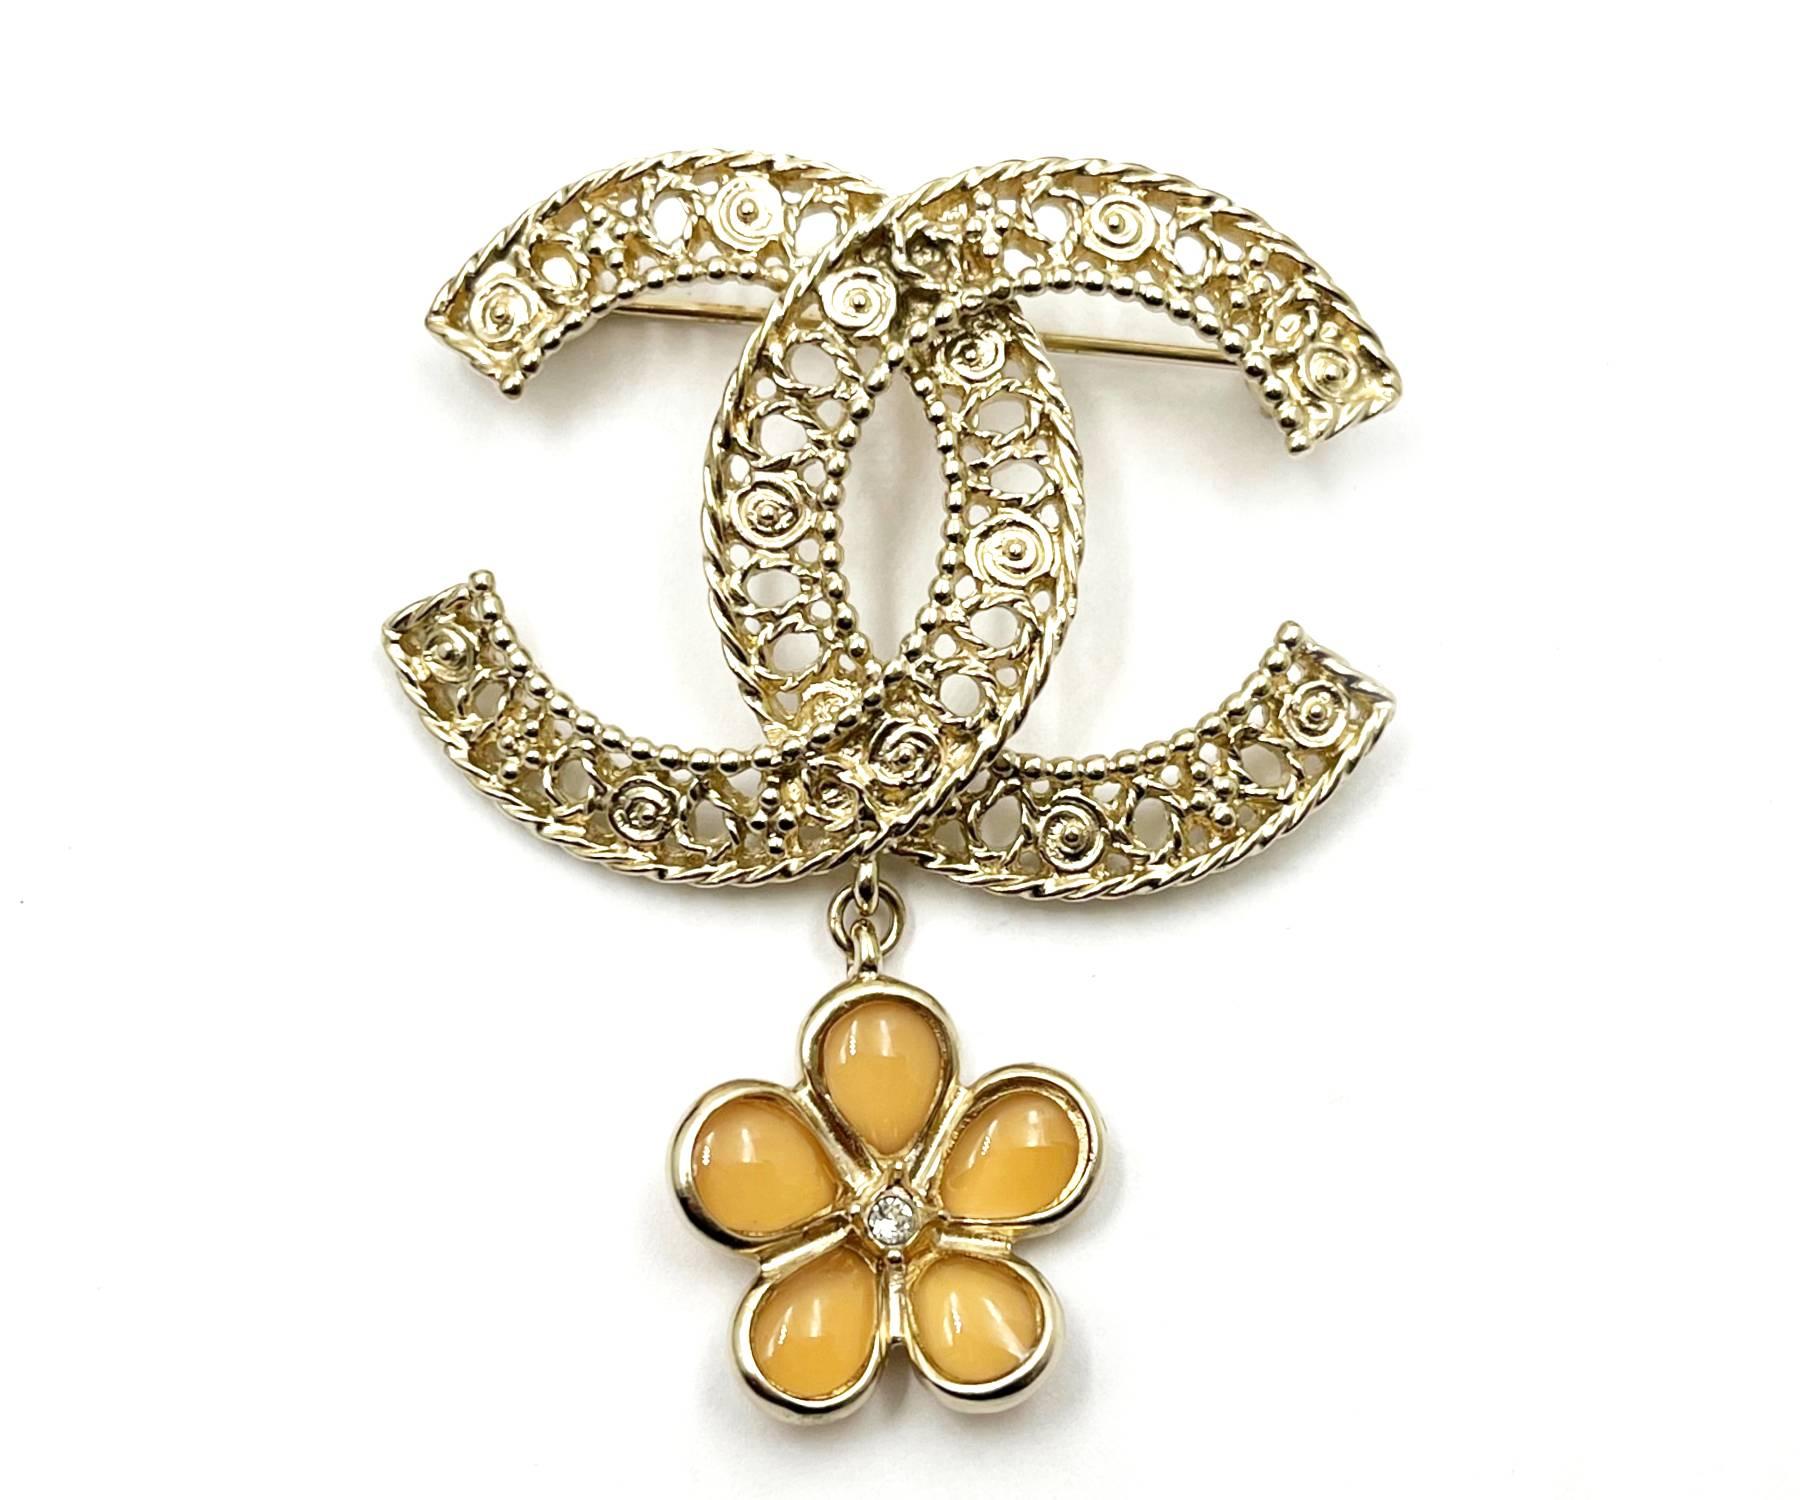 Chanel Light Gold Filigree Pink Flower Large Brooch

*Marked 18
*Made in France
*Comes with original box, pouch, and booklet

-Approximately 2.3″ x 2″
-Very classic and pretty

AB3178-00432